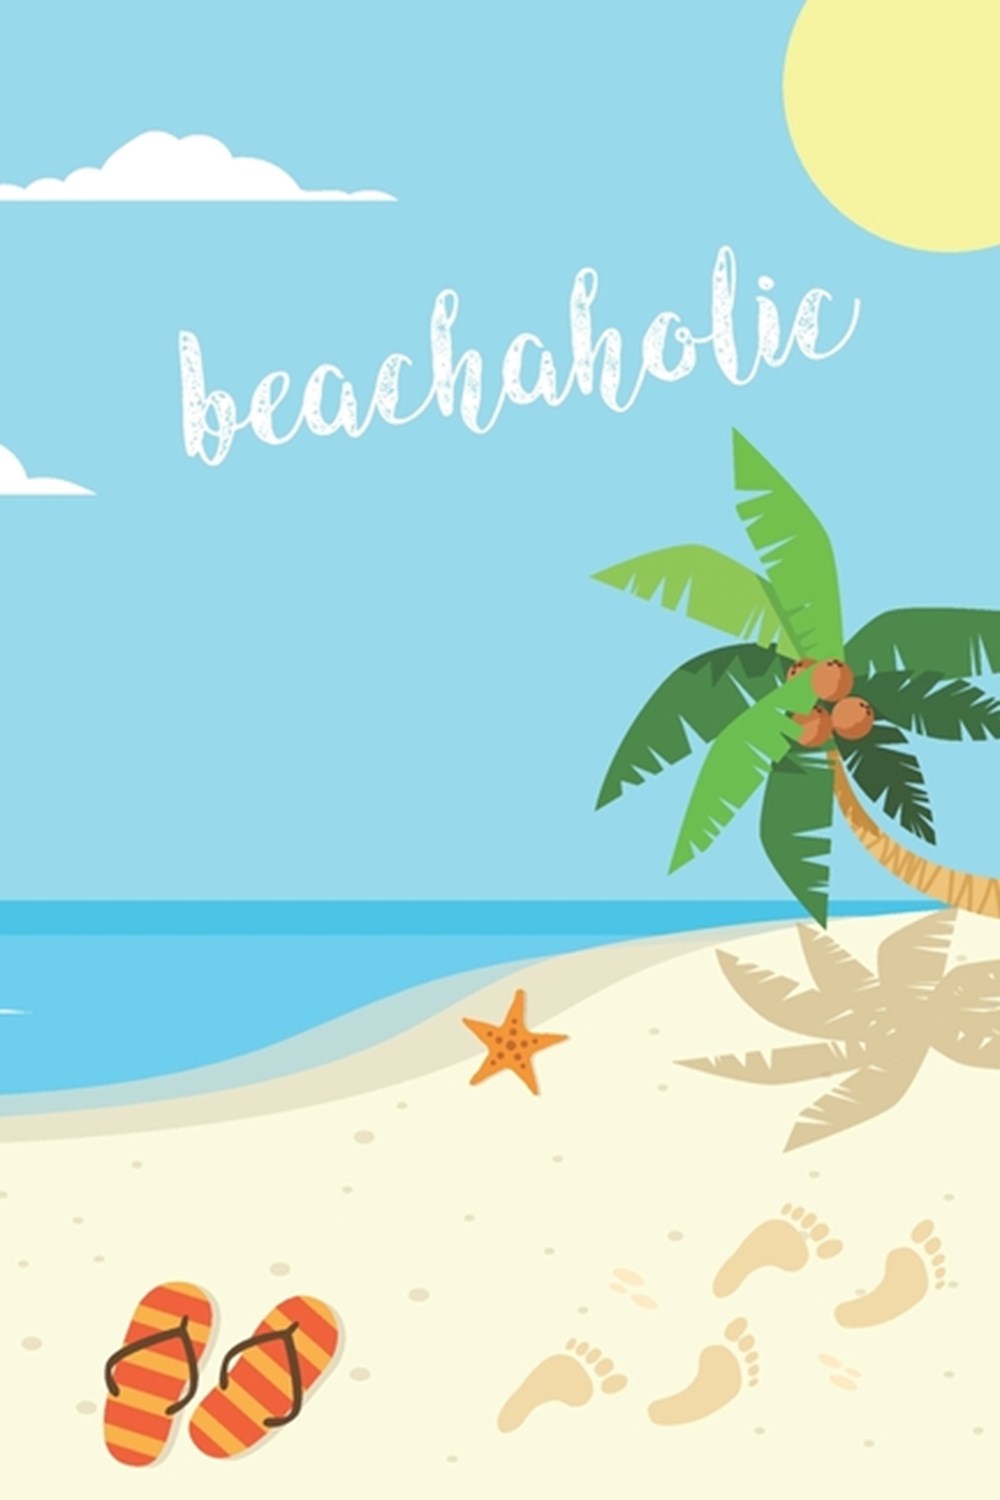 Beachaholic 2020 Weekly Planner For Those Who Love The Beach